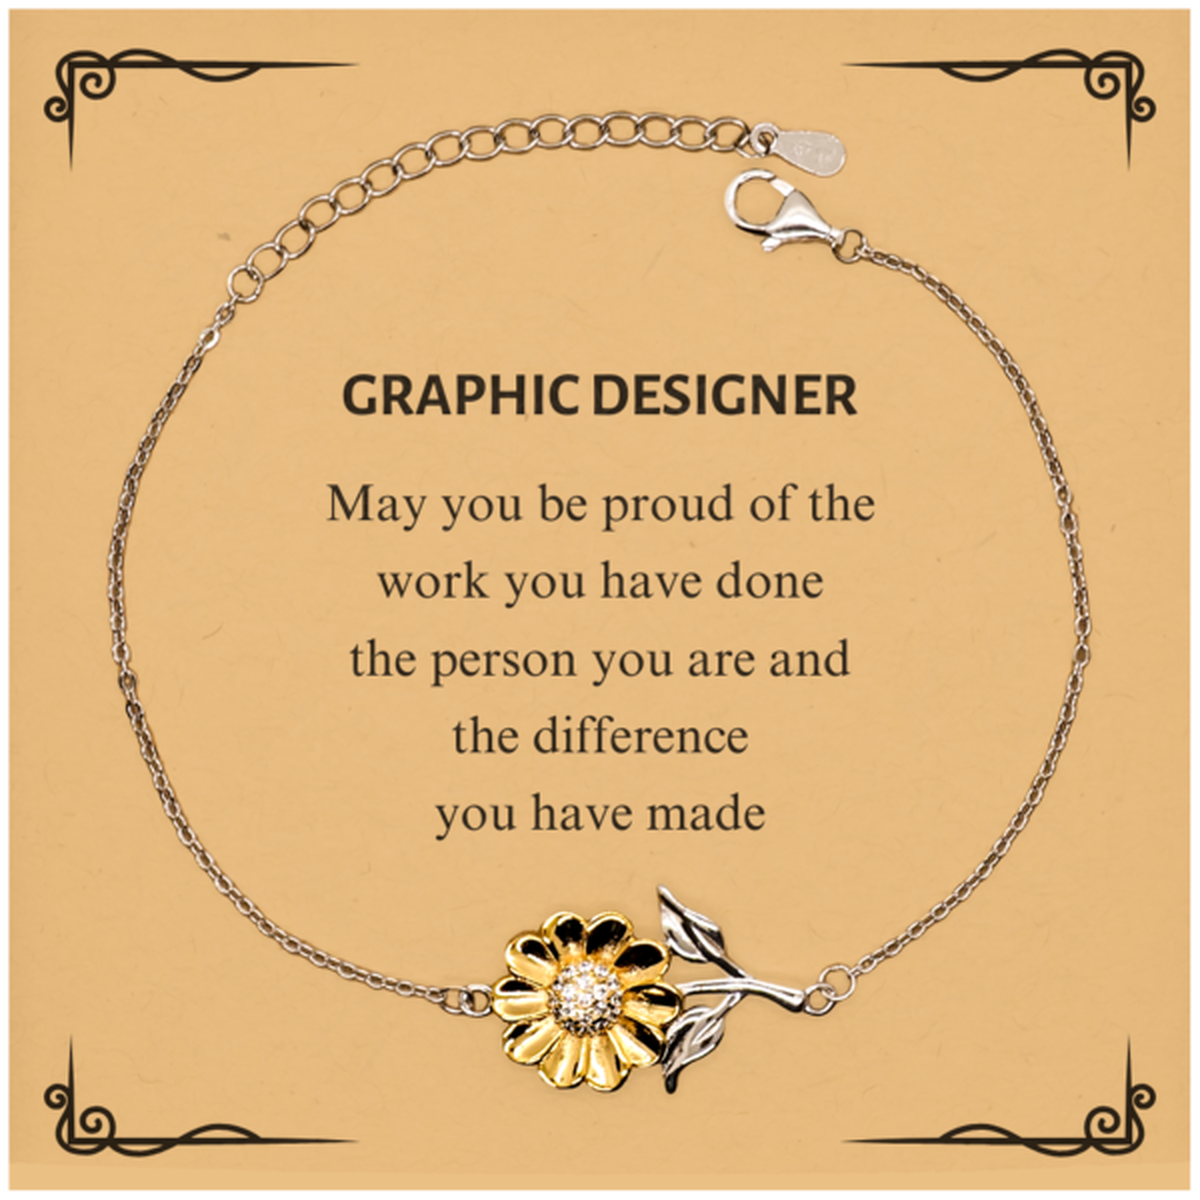 Graphic Designer May you be proud of the work you have done, Retirement Graphic Designer Sunflower Bracelet for Colleague Appreciation Gifts Amazing for Graphic Designer